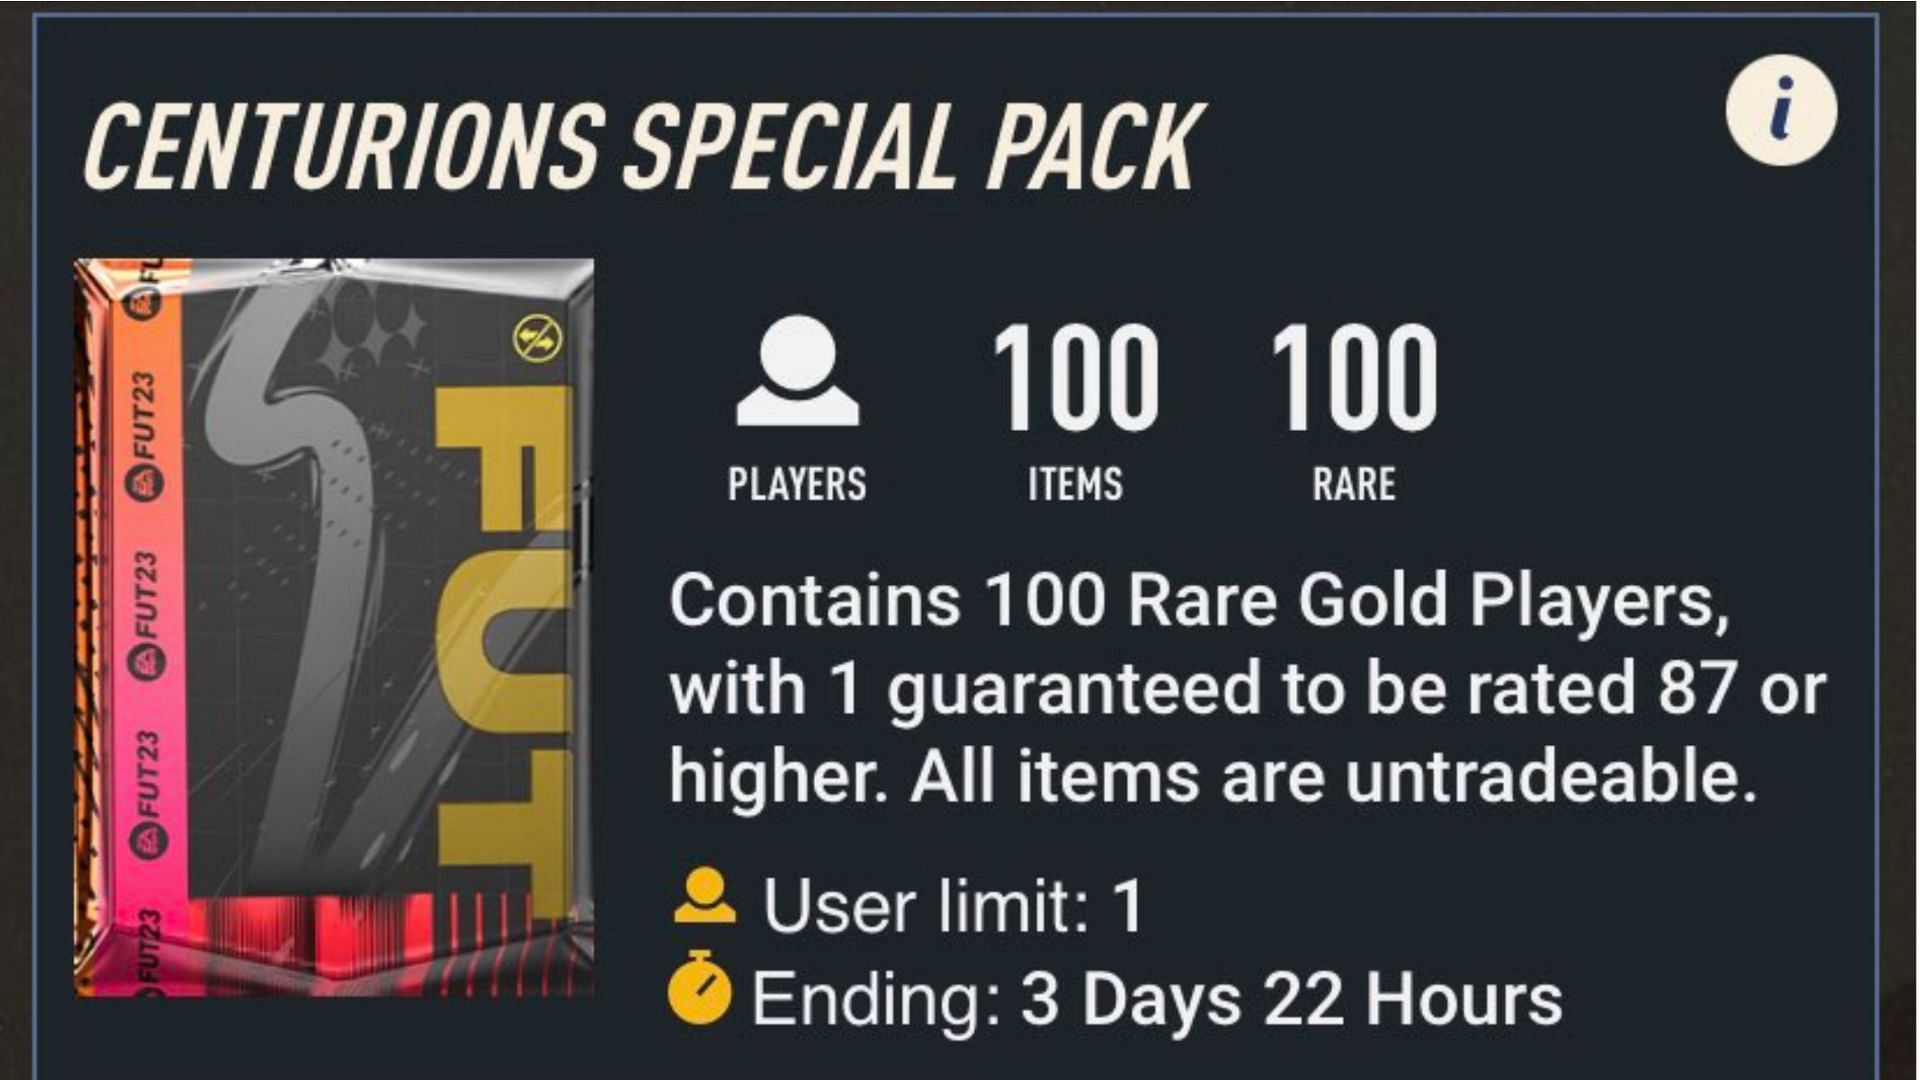 The special pack has been released with the Centurions promo (Image via EA Sports)